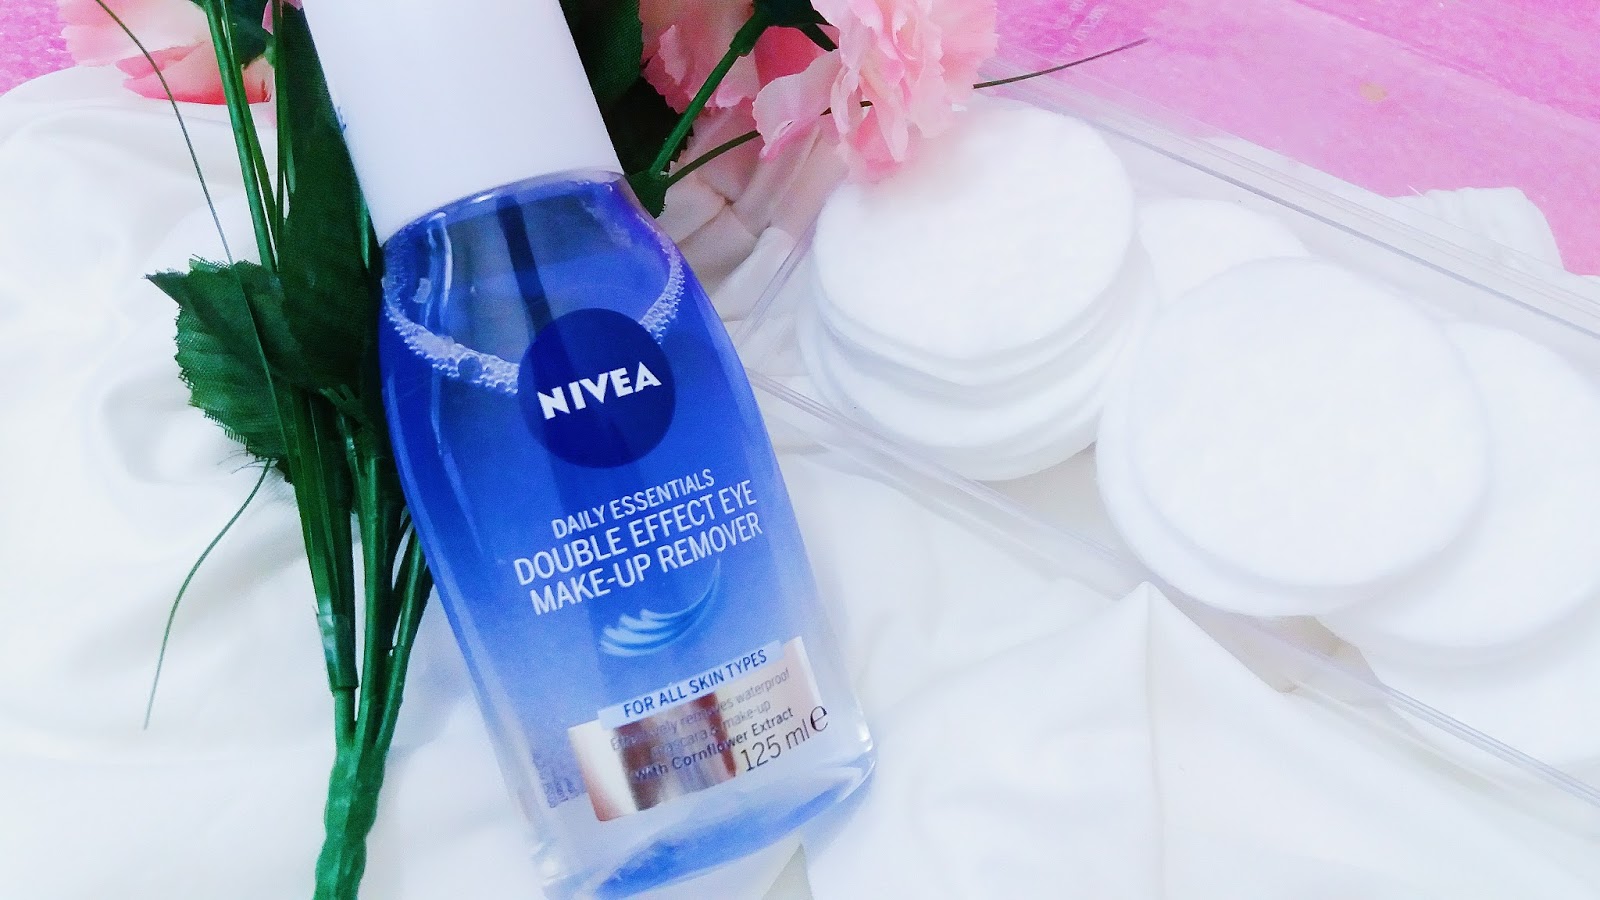 NIVEA DOUBLE EFFECT EYE MAKE-UP REMOVER REVIEW